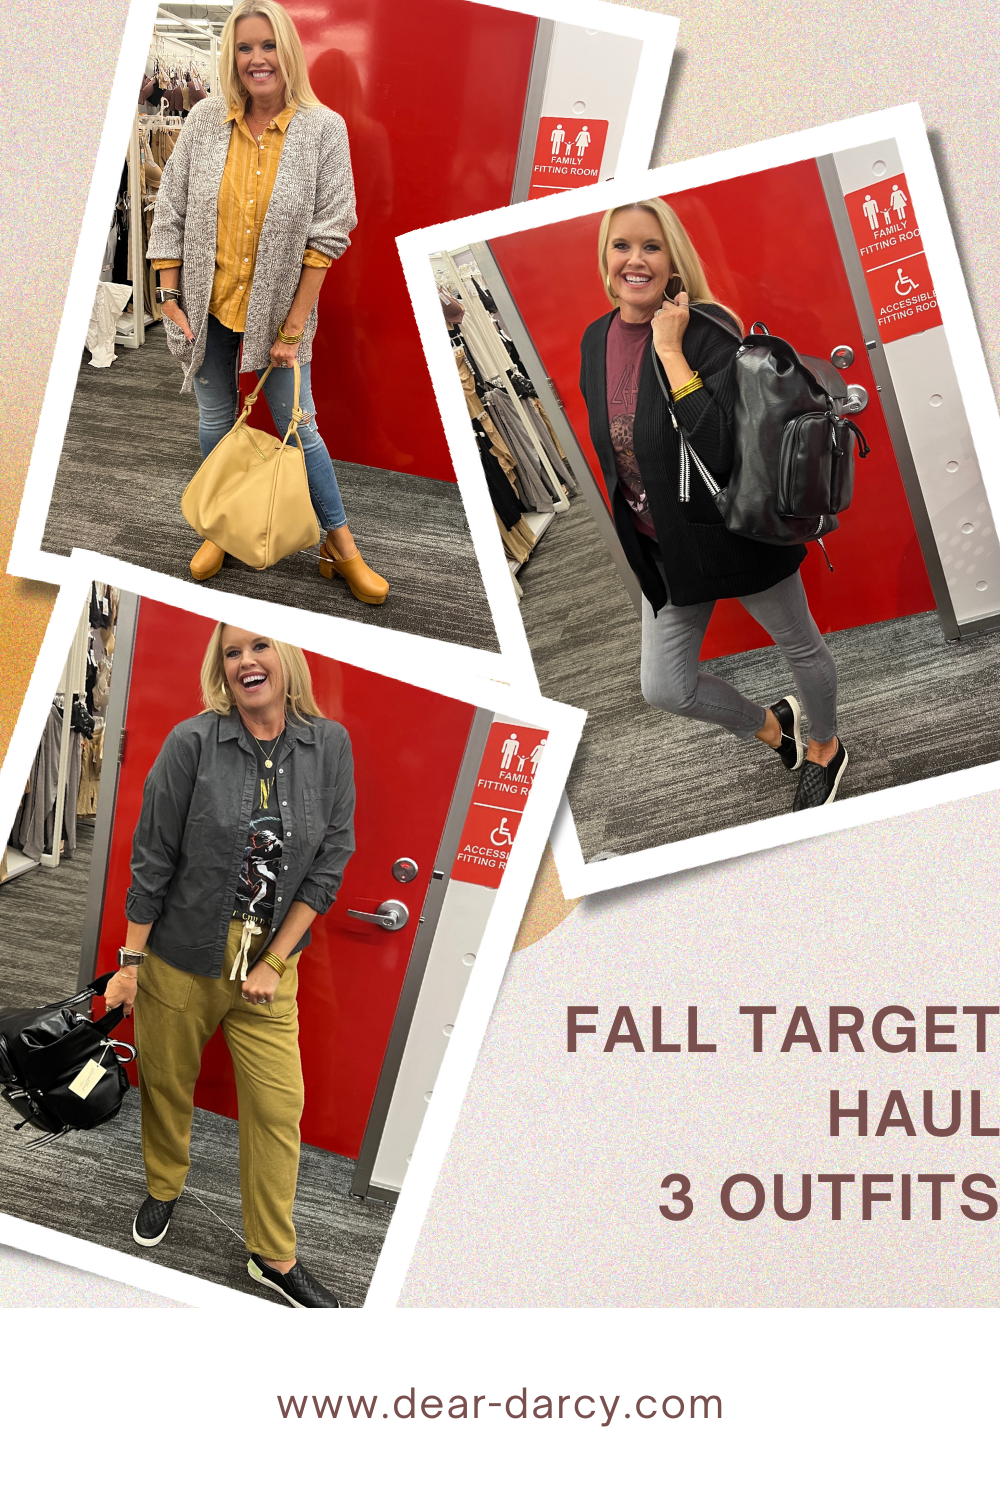 Fall Target Haul 3 Outfits